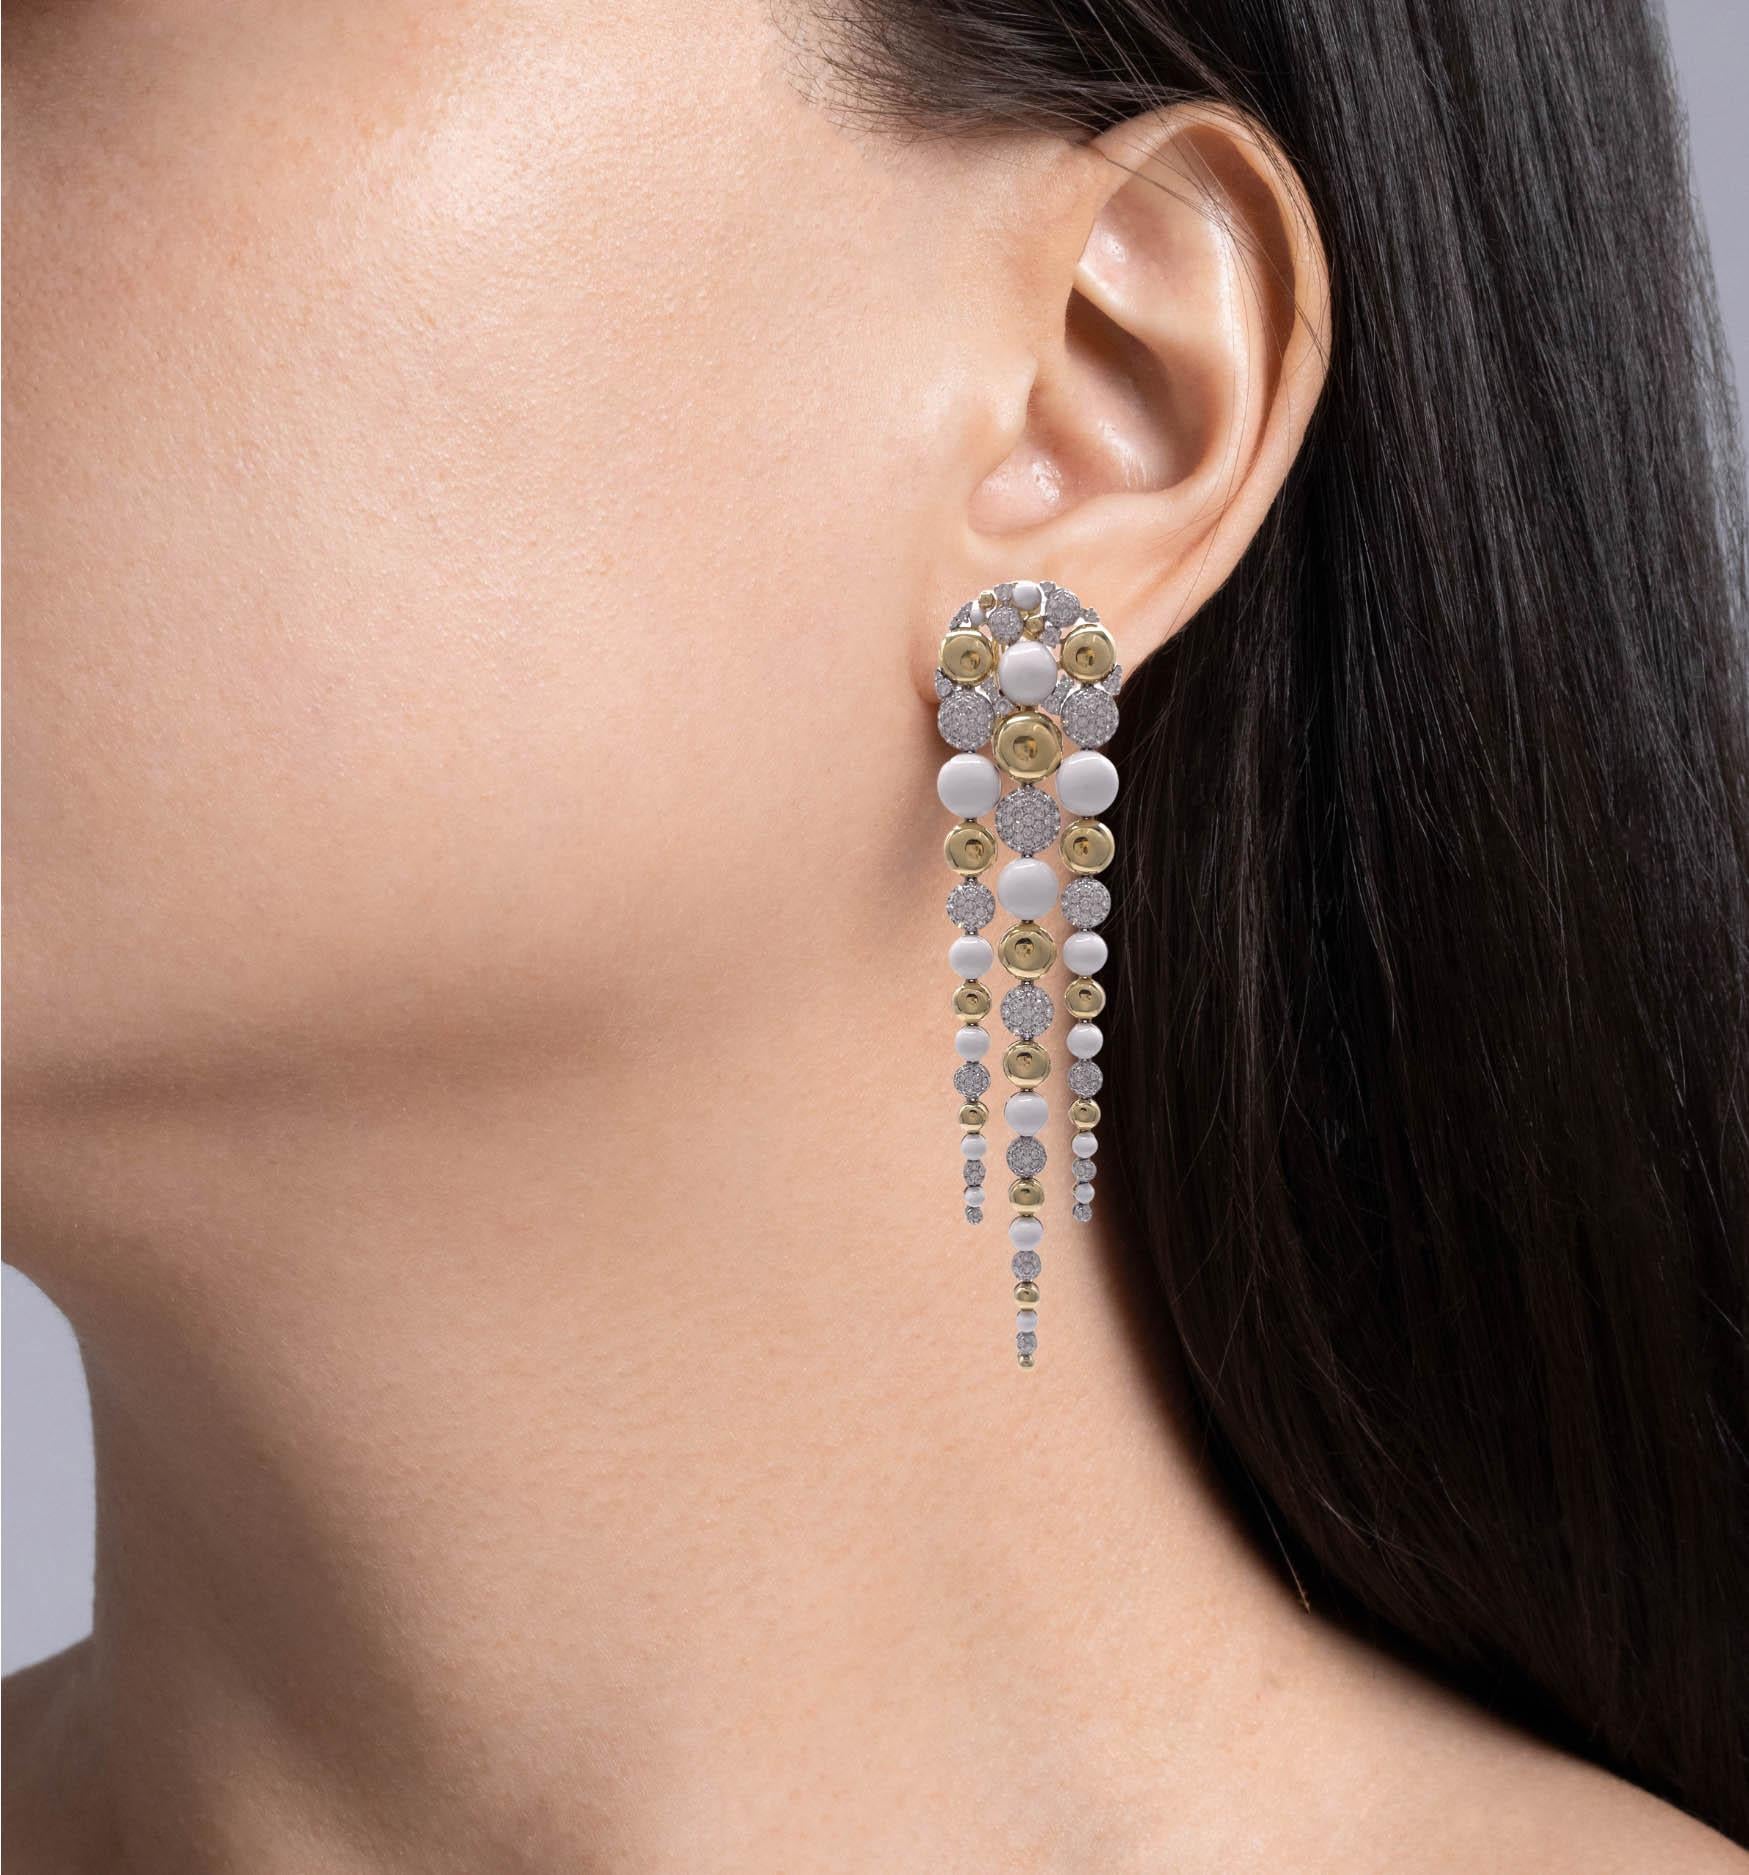 Sutra 18k Two Tone Gold Diamond White Ceramic Bubble Drop Dangle Earrings
Made of 18k Yellow and White Gold with small round brilliant diamonds.
Each earring is almost 4 inches long and 1 inch wide.
The total weight of the earrings is 33